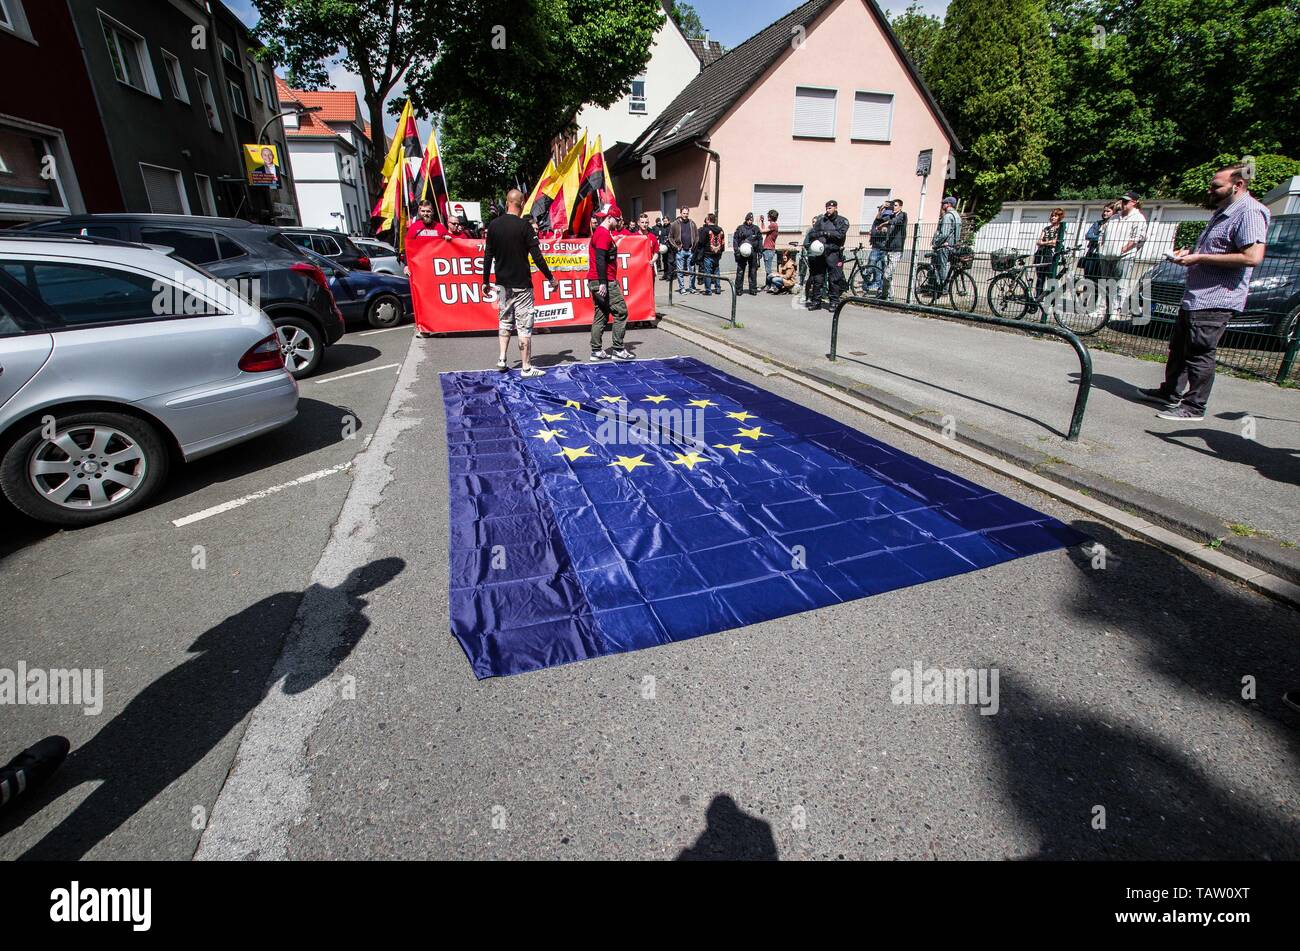 Dortmund, Nordrhein Westfalen, Germany. 25th May, 2019. Neonazis in Dortmund, Germany unfurl the European Union flag and trample over it during their march. Prior to the European Elections, the neonazi party Die Rechte (The Right) organized a rally in the German city of Dortmund to promote their candidate, the incarcerated Holocaust denier Ursula Haverbeck. The demonstration and march were organized by prominent local political figure and neonazi activist Michael Brueck (Michael BrÃ¼ck) who enlisted the help of not only German neonazis, but also assistance from Russian, Bulgarian, Hungarian, Stock Photo